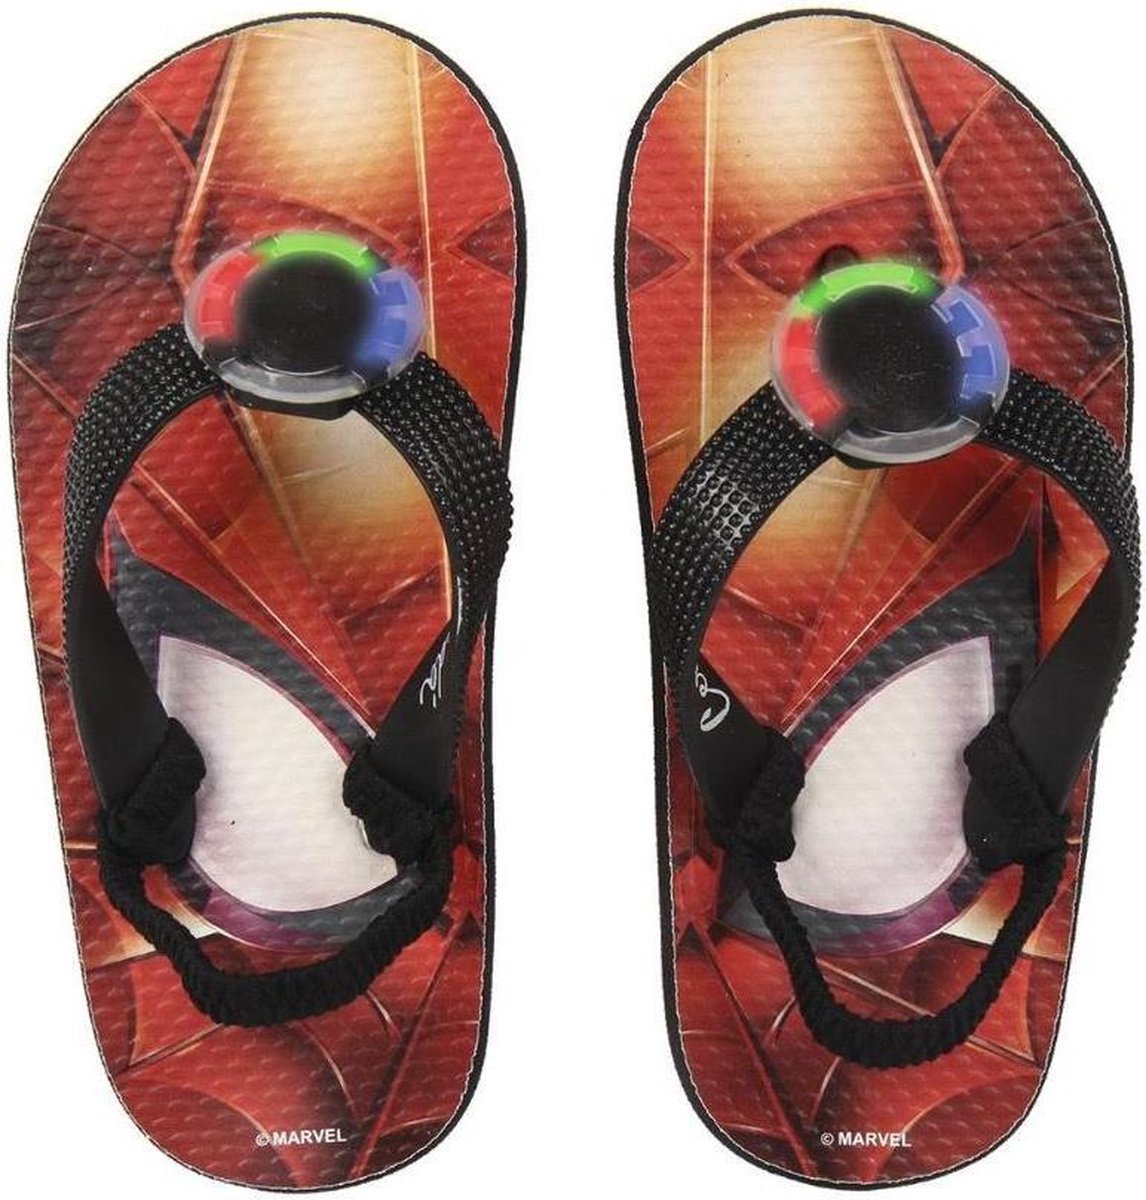 Marvel Spiderman Slippers With Light At Spiderman Dress Up Suit Dress Up Clothes